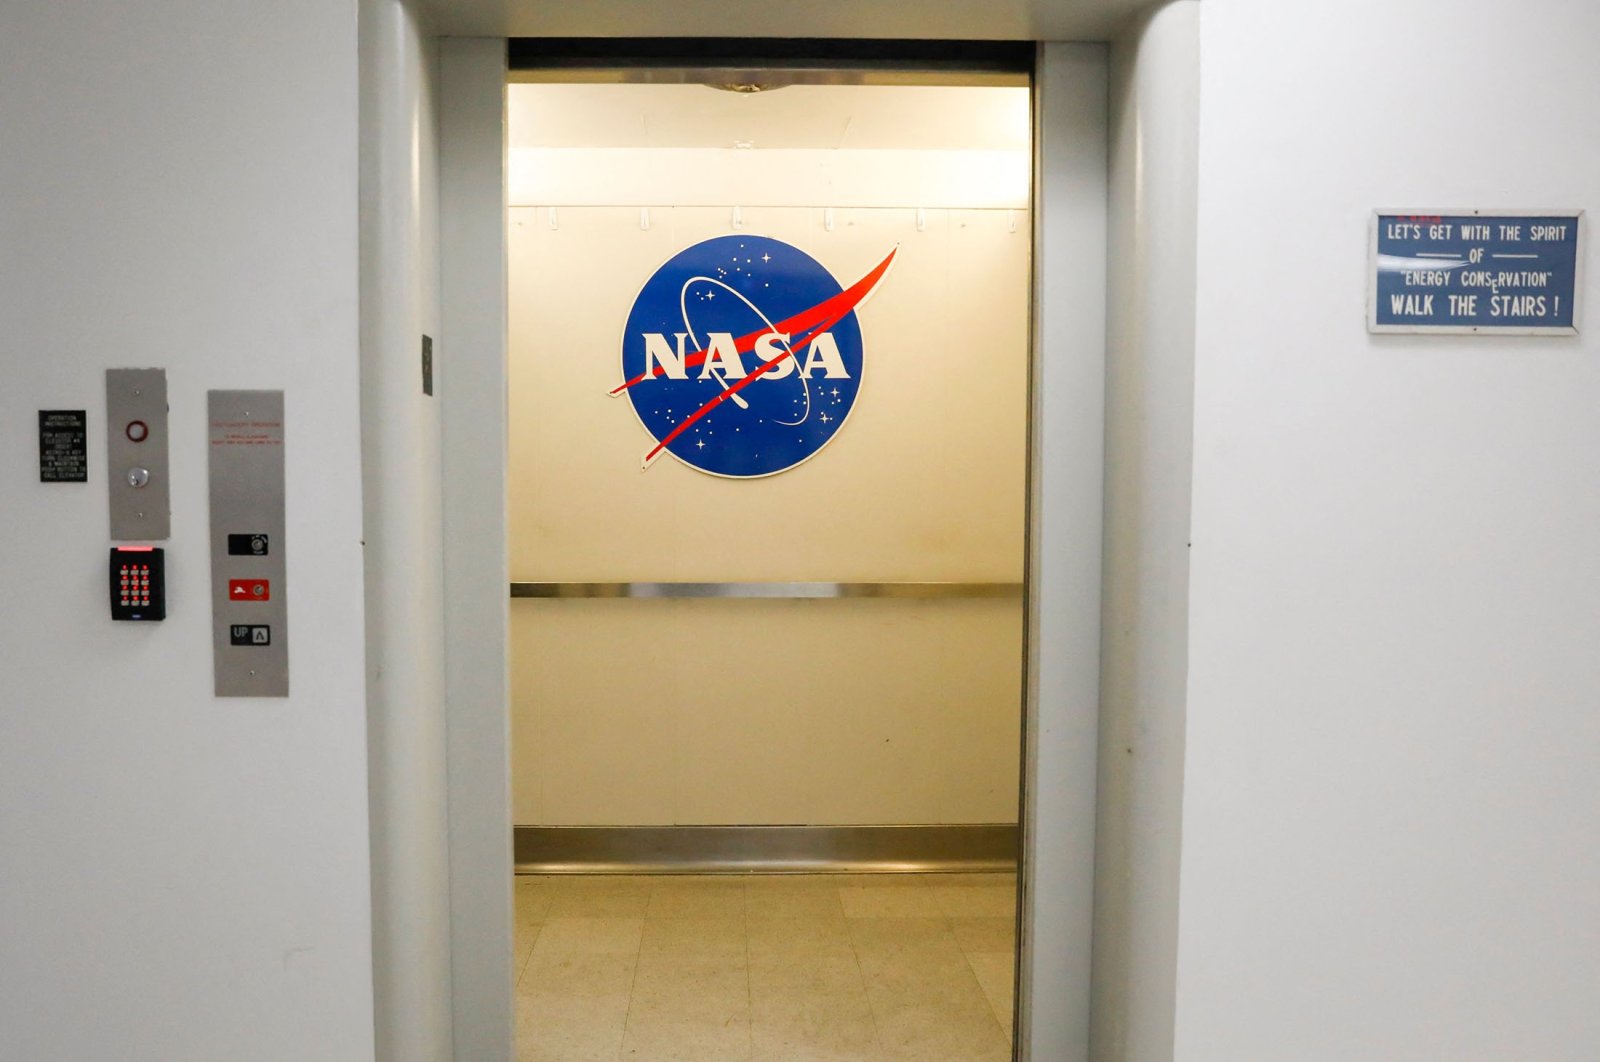 A NASA sign in an elevator at the Astronaut Crew Quarters (ACQ) in the Neil Armstrong Operations and Checkout Building at Kennedy Space Center, Cape Canaveral, Florida, U.S., June 14, 2022. (AFP Photo)